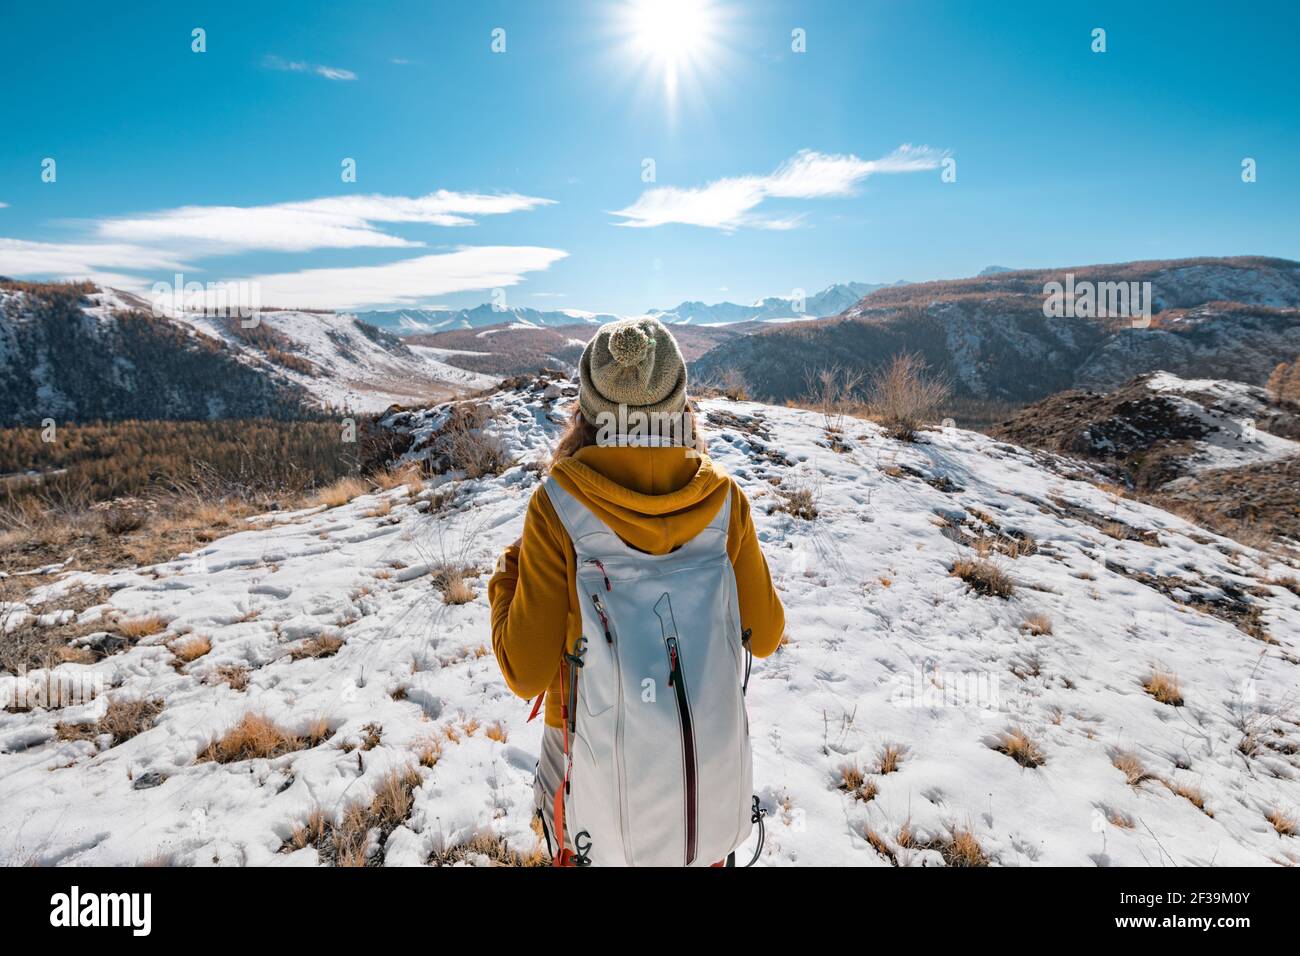 A hiker pauses for contemplation on a crisp and snowy day in mountains Stock Photo